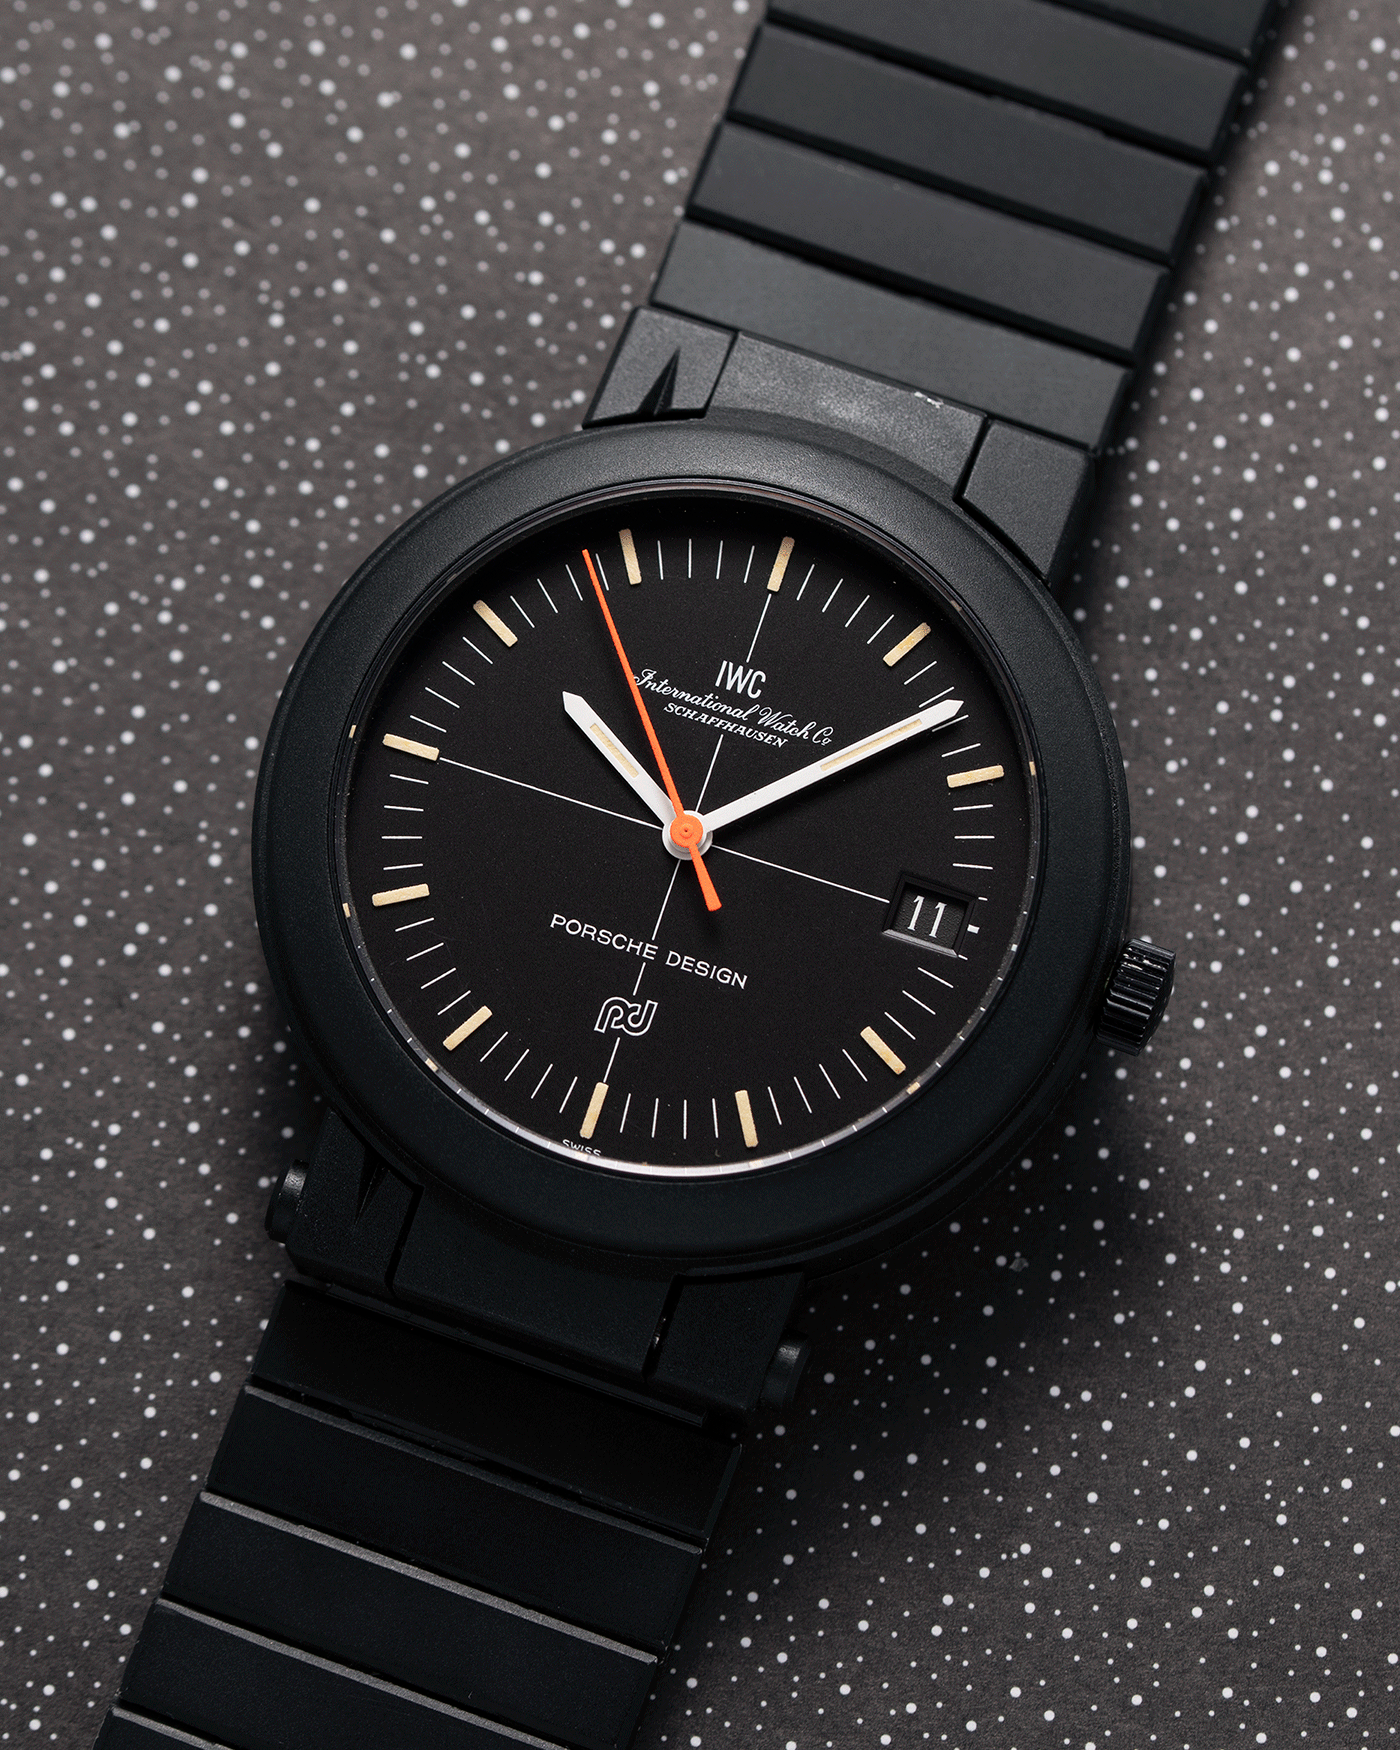 Brand: IWC Year: 1980’s Model: Compass Watch Reference: 3510 Material: PVD Coated Aluminium  Movement: IWC caliber 375 Case Diameter: 39mm Strap: IWC PVD Coated Aluminium Bracelet